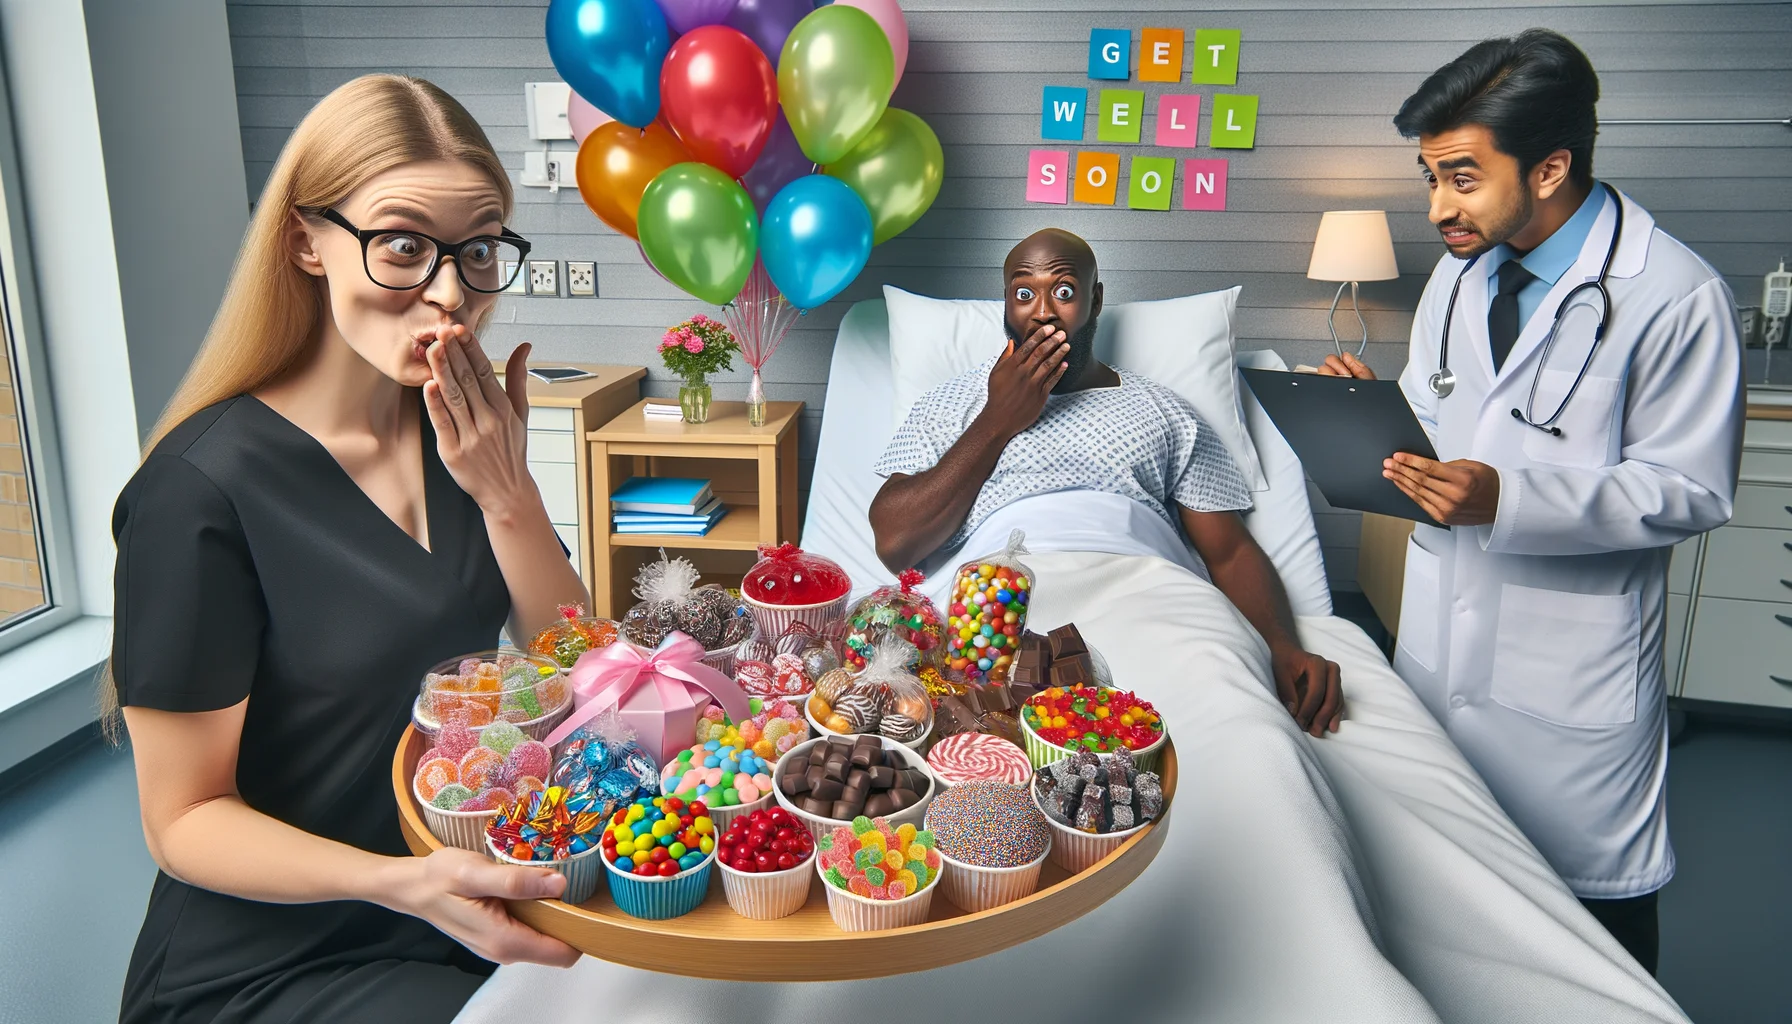 An amusingly realistic scenario showing a selection of sweets ready for post-surgery recovery. In the middle of a hospital room filled with balloons, a Caucasian female nurse presents a tray full of various brightly colored, enticing candies and chocolates. A Black male patient, sitting comfortably on the hospital bed, wears a surprised and delighted expression, eyeglasses perched on his nose. His Middle-Eastern male doctor, bewildered, watches the scene unfold while holding his medical chart. Get well soon cards are placed on the side table complementing the joyful atmosphere.